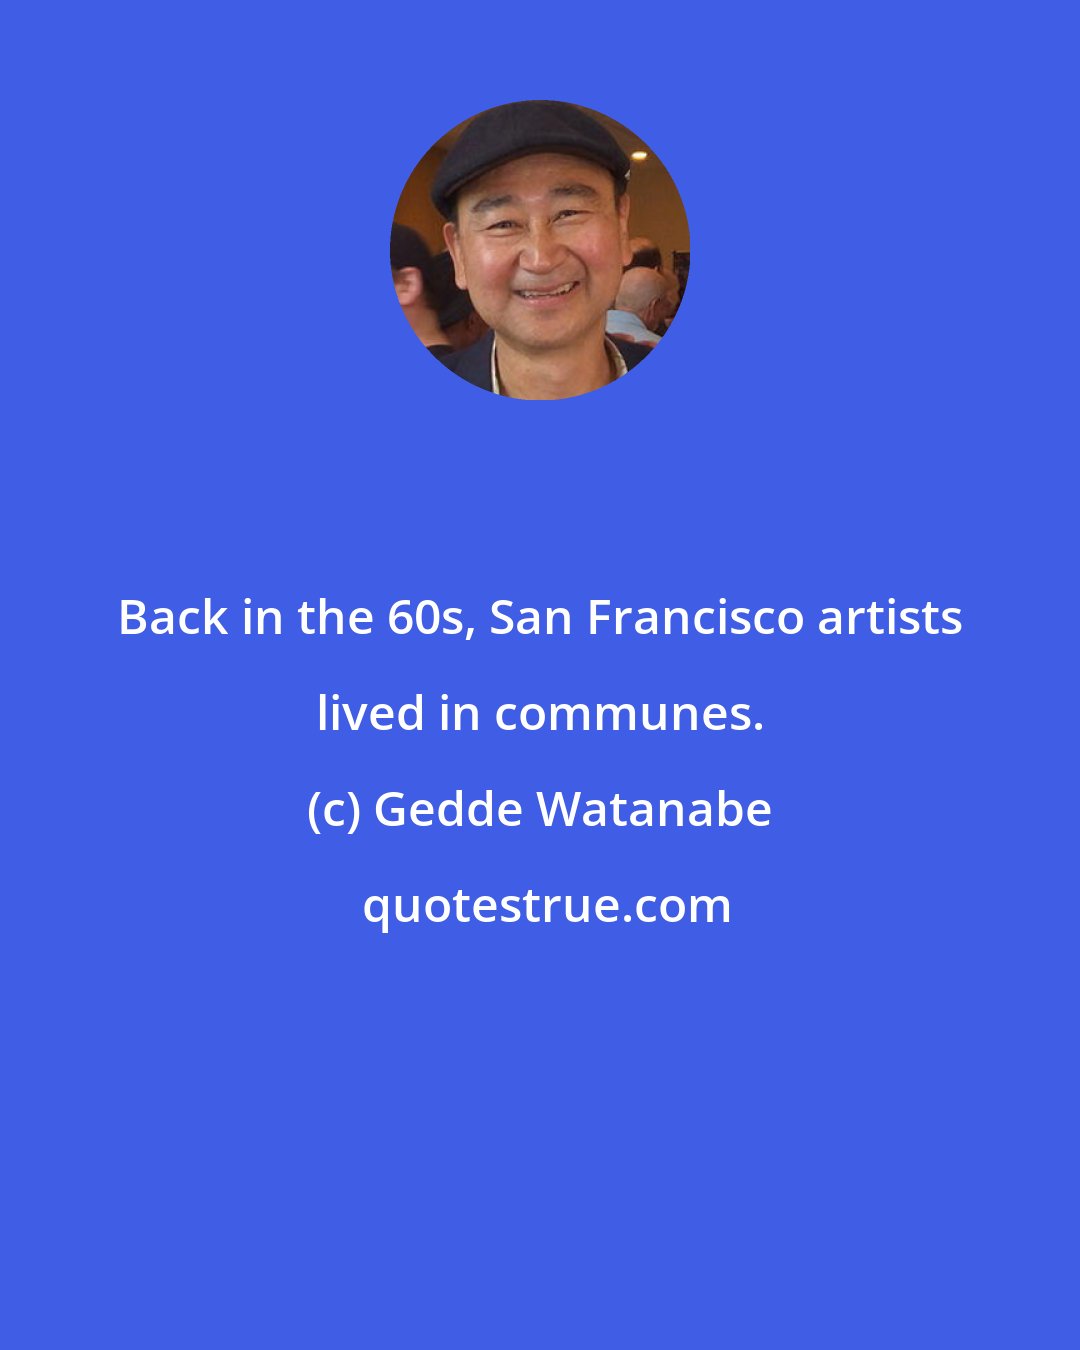 Gedde Watanabe: Back in the 60s, San Francisco artists lived in communes.